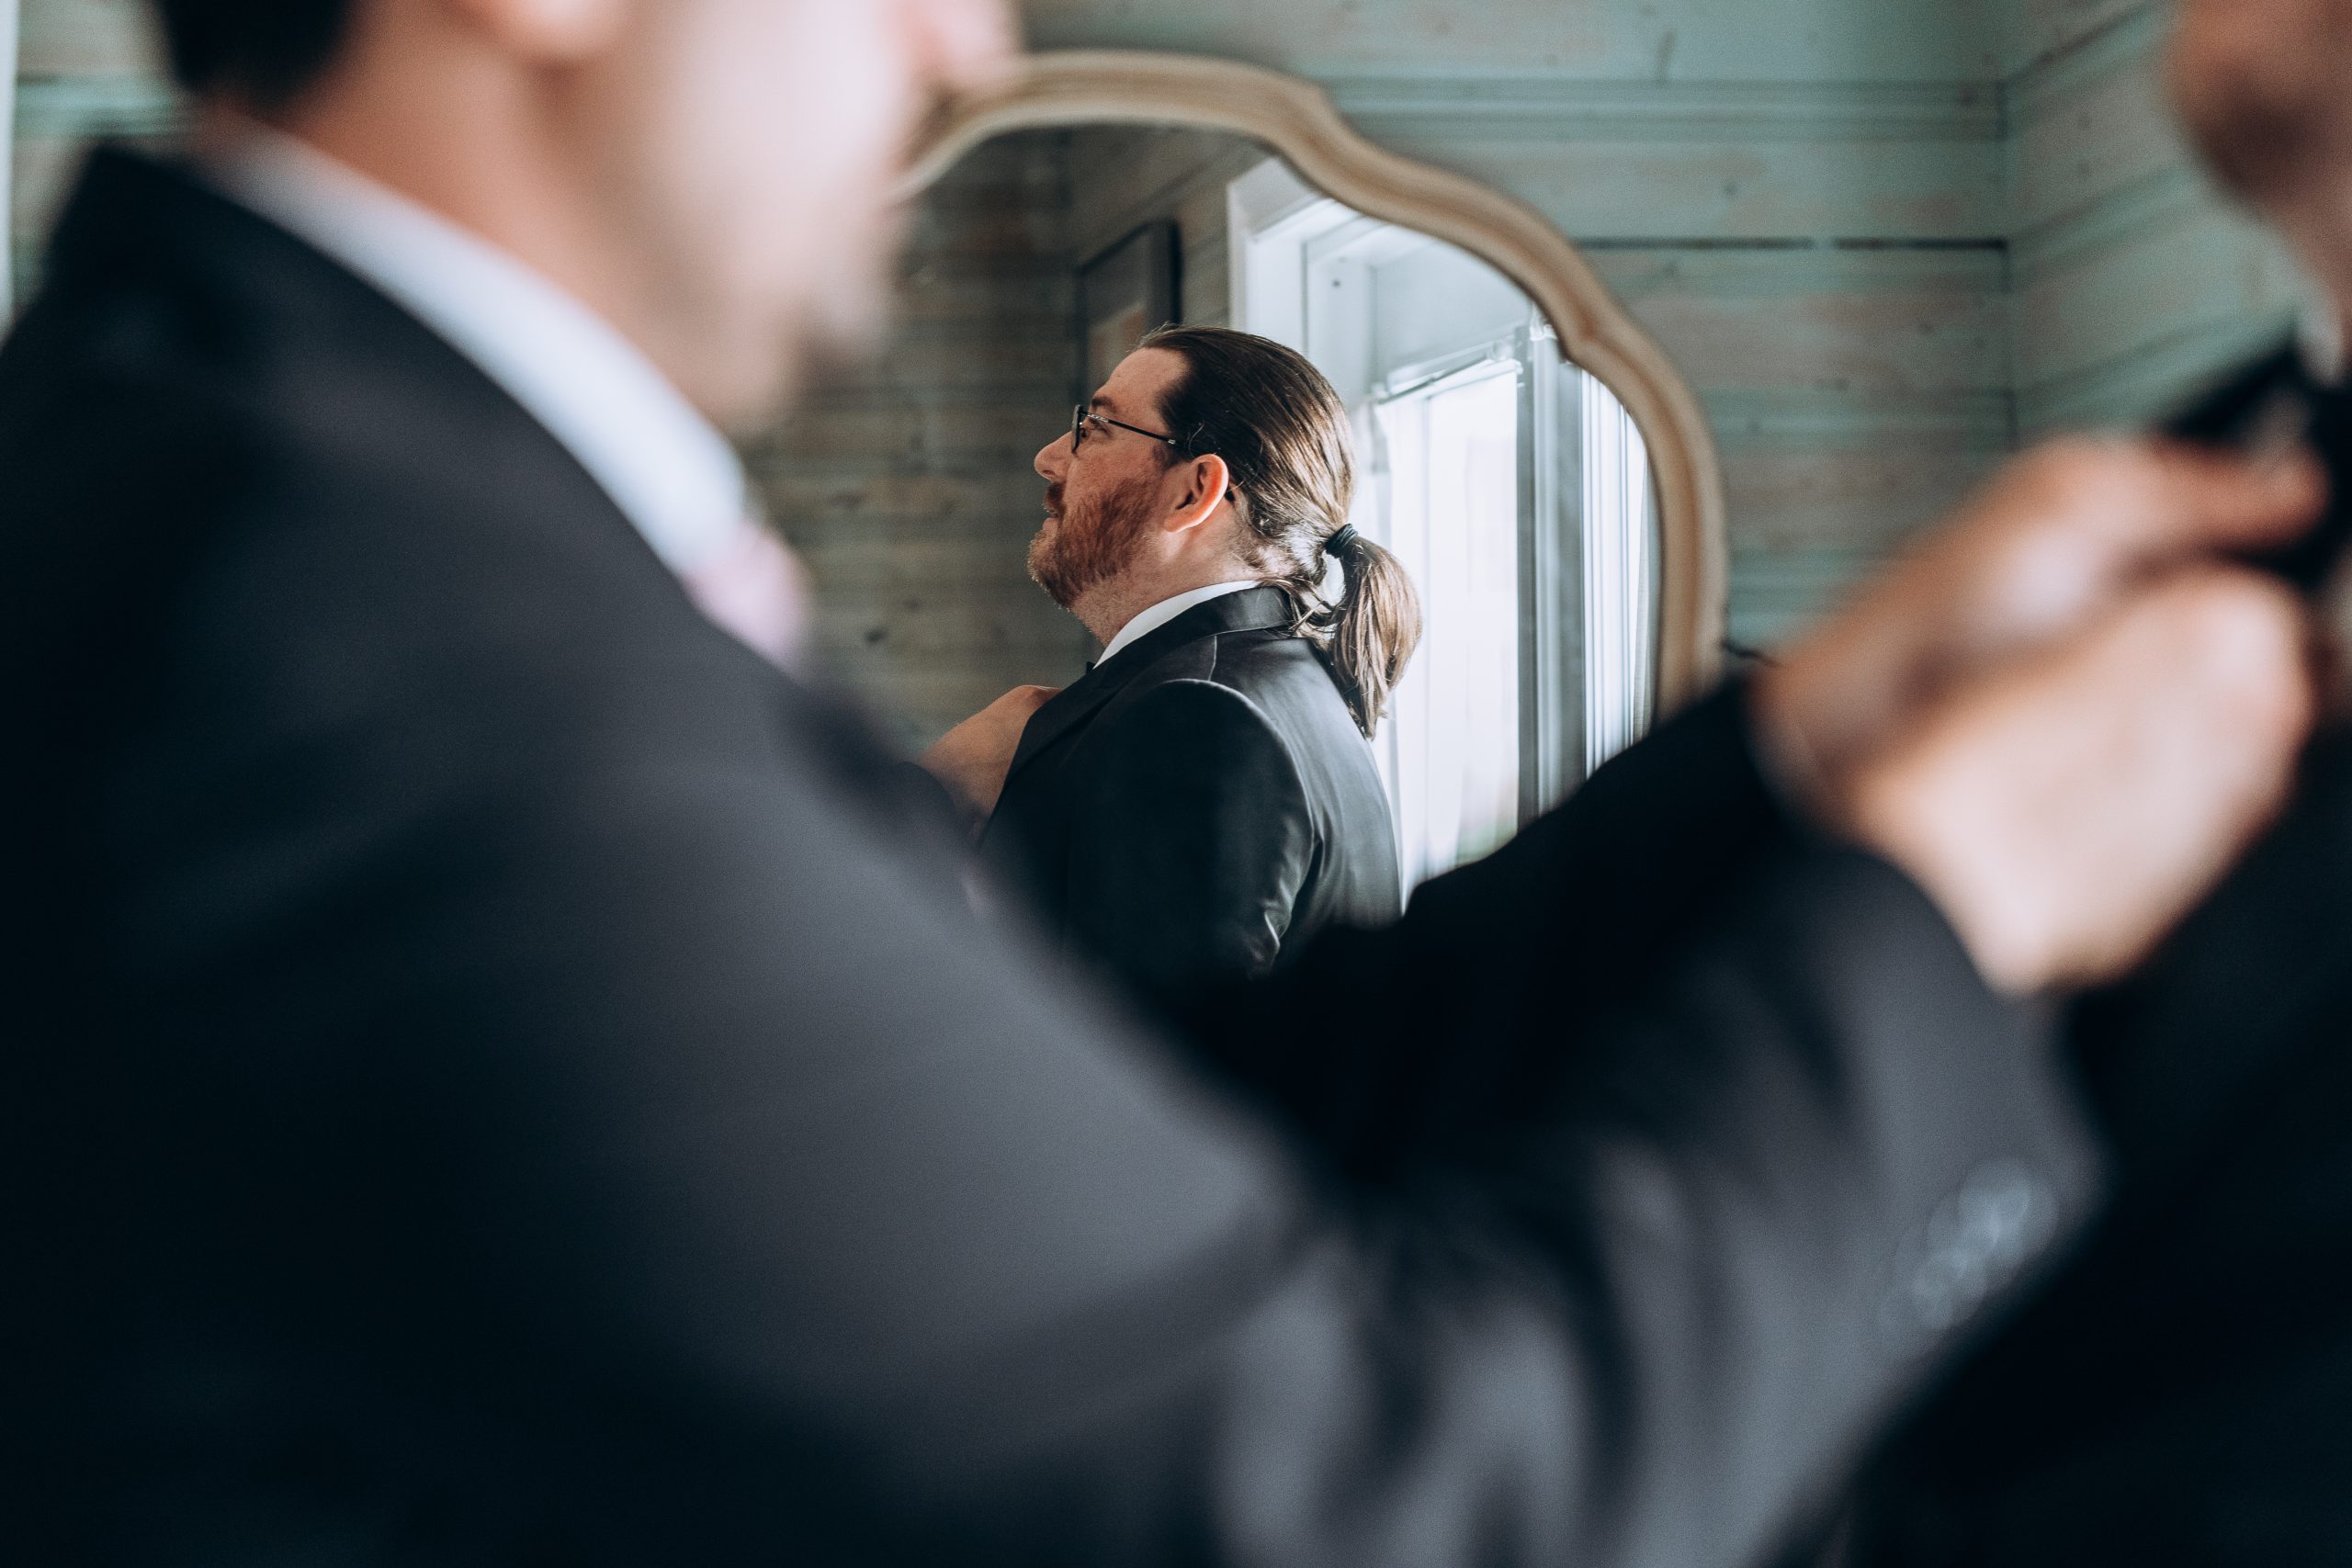 grooms reflection in a mirror as he prepares for his wedding day